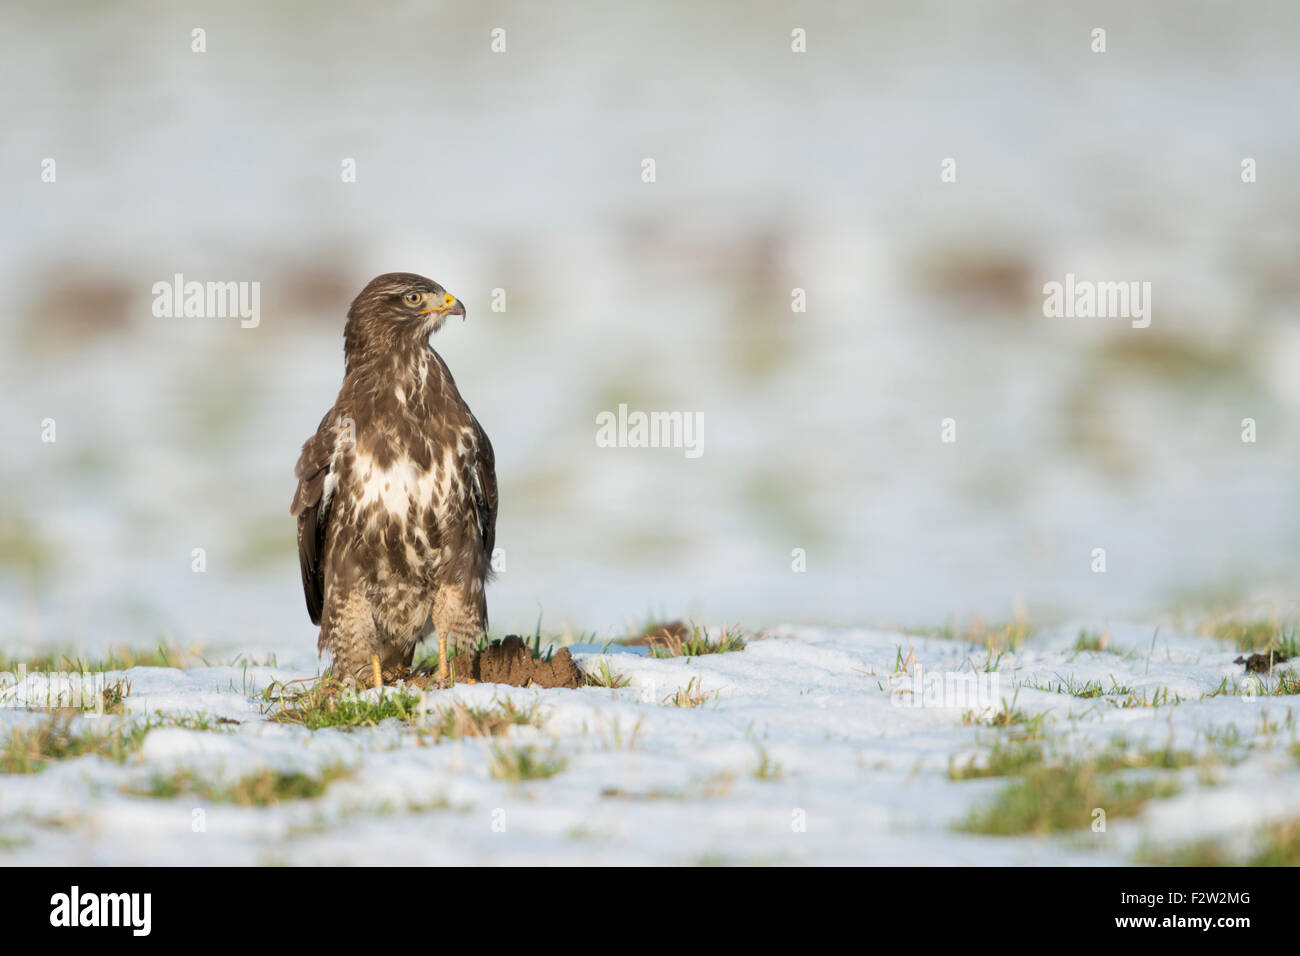 Common Buzzard / Buzzard / Maeusebussard ( Buteo buteo ) standing / hunting / looking around on a snow covered pasture. Stock Photo